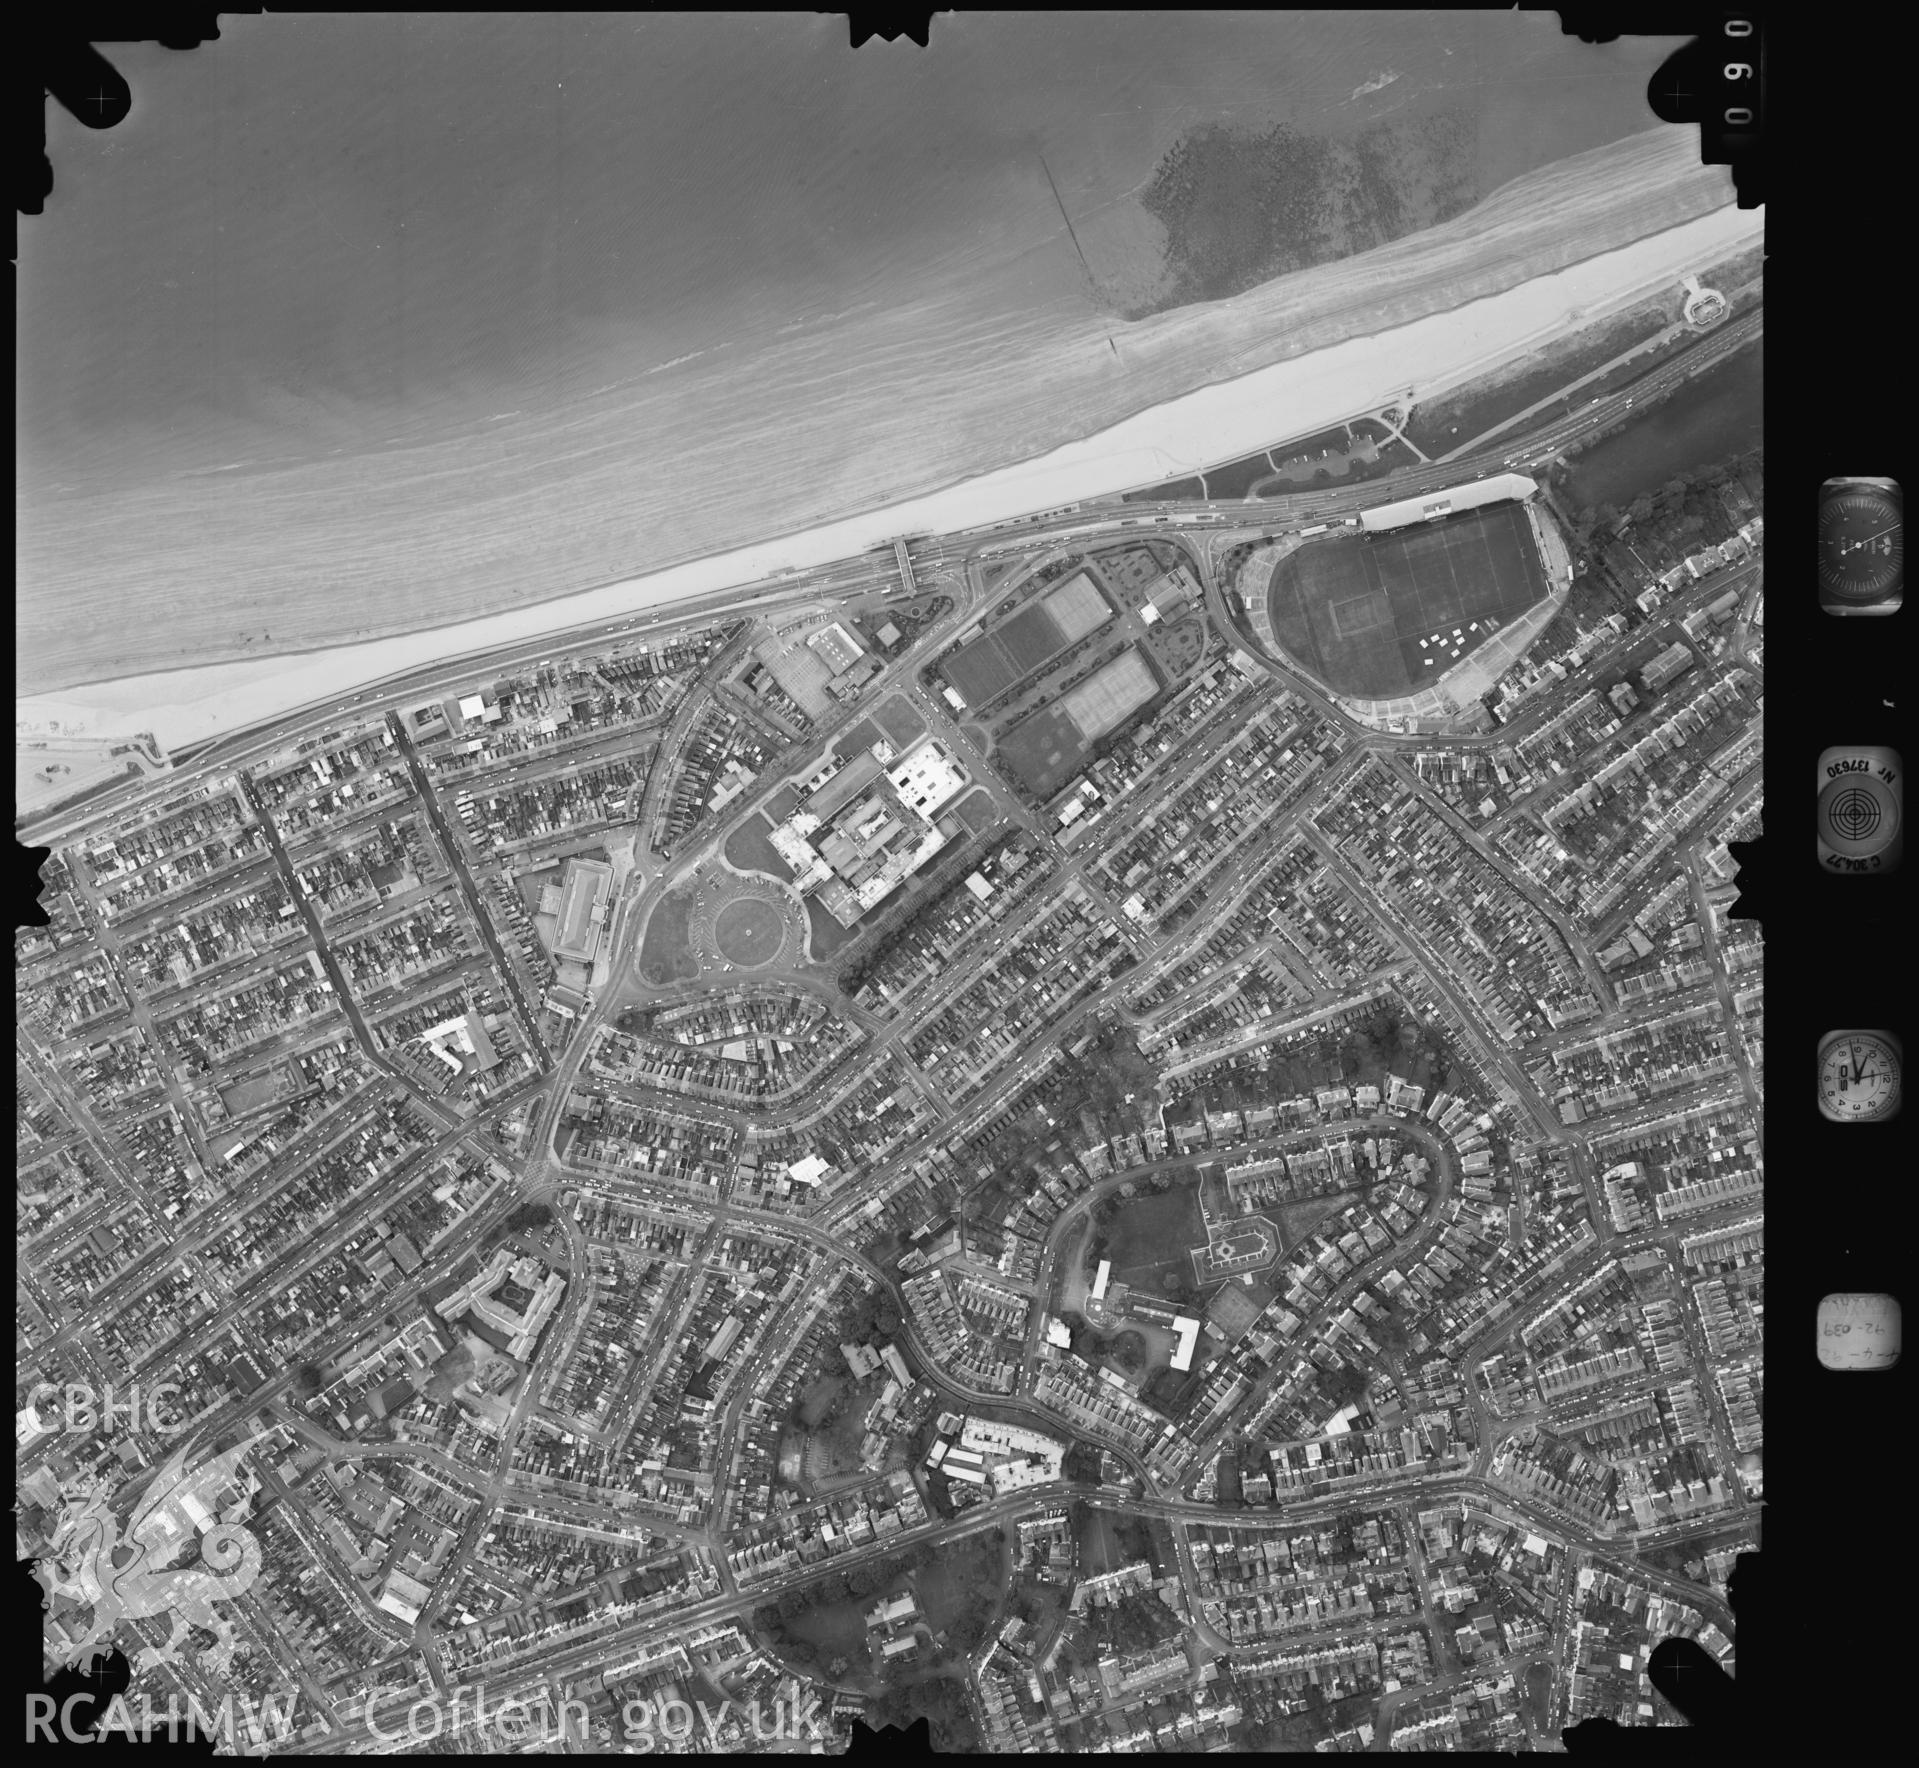 Digitized copy of an aerial photograph showing theSwansea area, taken by Ordnance Survey, 1993.